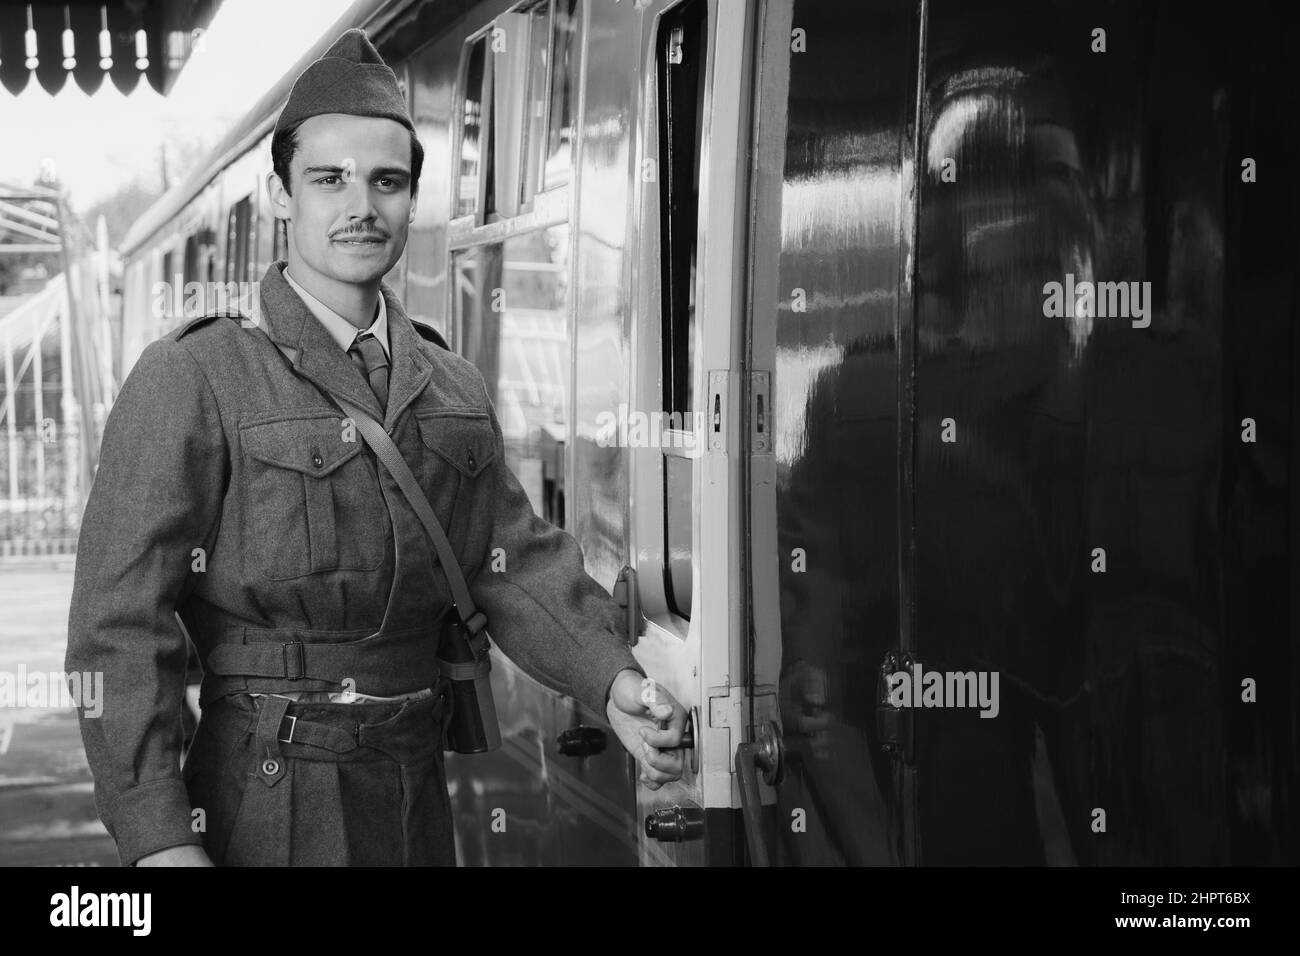 Attractive male british soldier in vintage WW2 uniform at train station standing next to train looking pensive Stock Photo